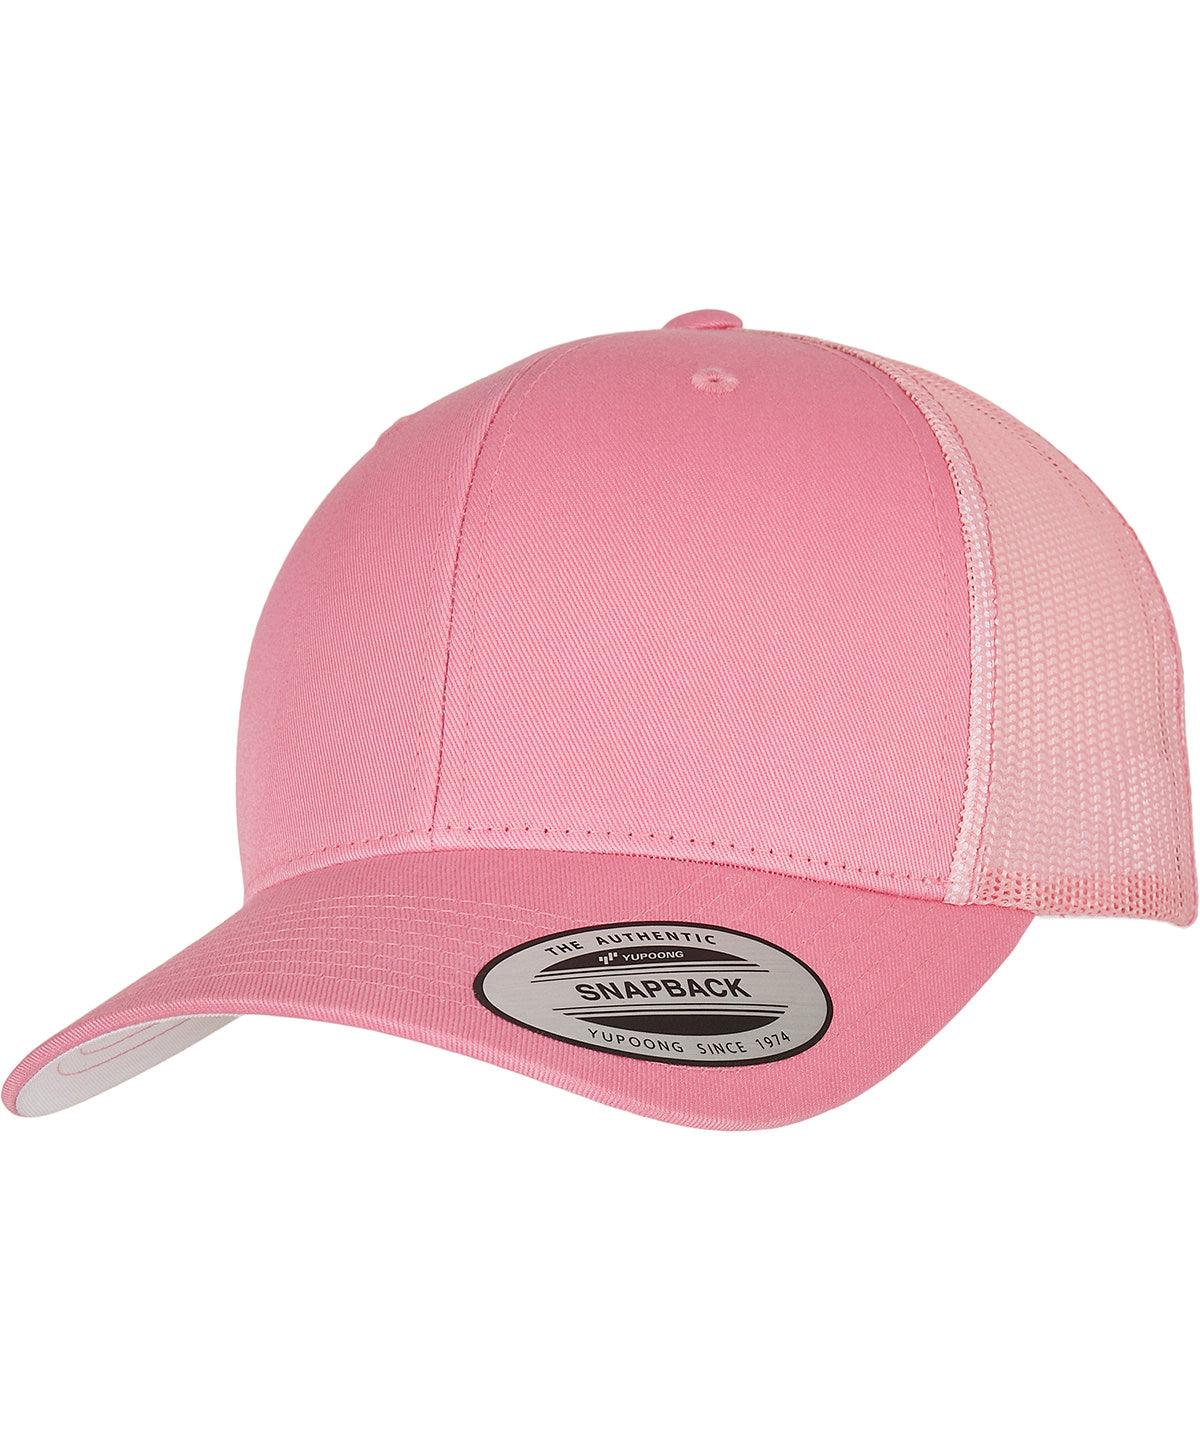 Pink - Retro trucker cap (6606) Caps Flexfit by Yupoong 2022 Spring Edit, Headwear, Must Haves, New Colours For 2022, New Colours for 2023, Rebrandable, Summer Accessories Schoolwear Centres